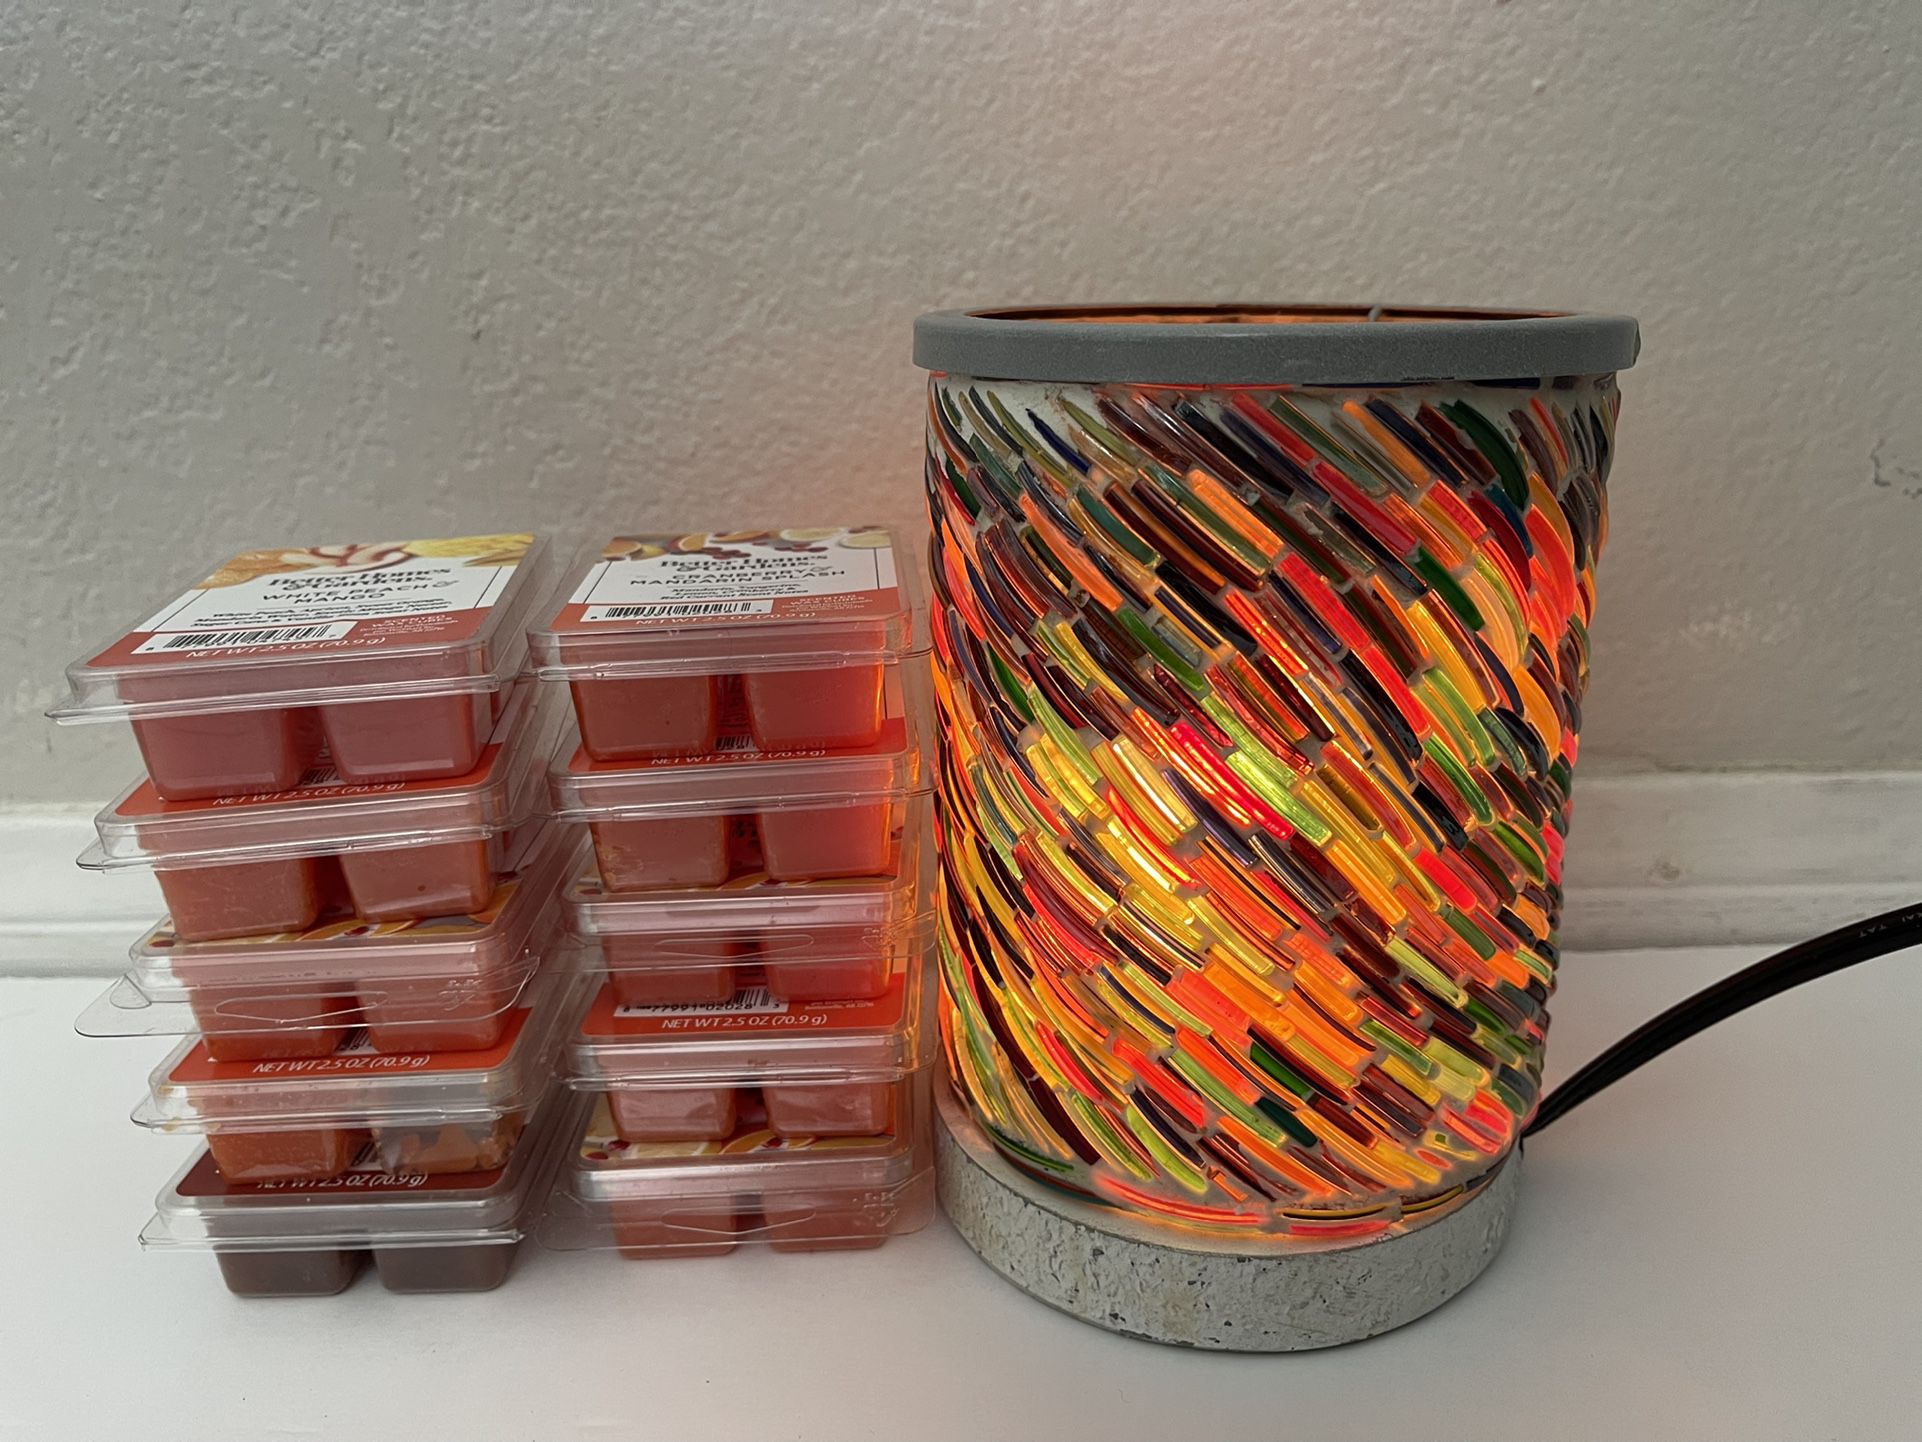 Scentsy 7x5in Lamp Wax Burning Warmer & 10 Assorted Melts Packages